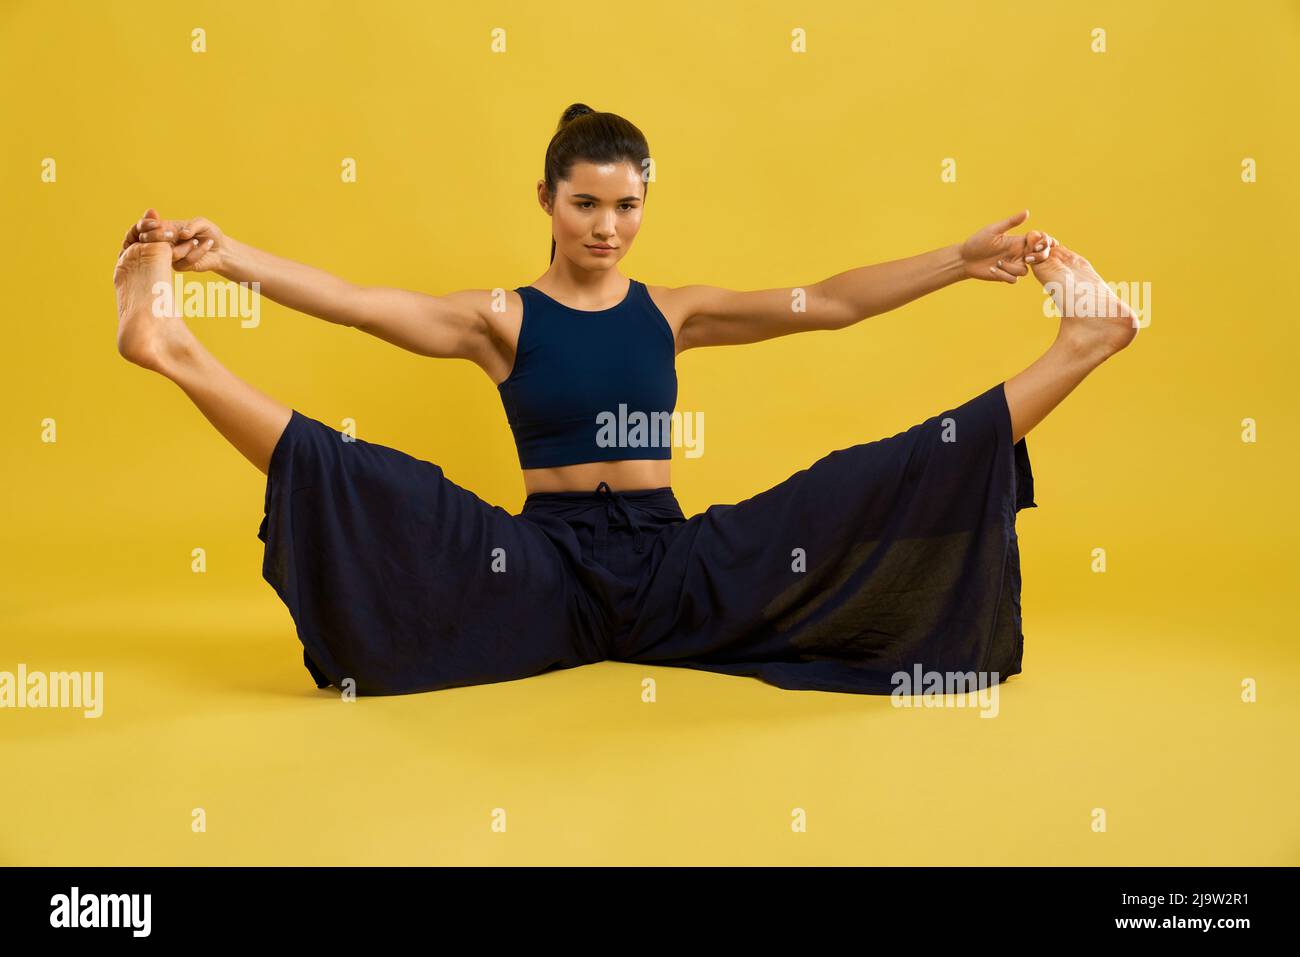 Fit caucasian girl stretching legs in Upavistha Konasana during yoga training. Front view of brunette woman in wide pants practicing yoga, isolated on tangerine studio background. Concept of yoga. Stock Photo